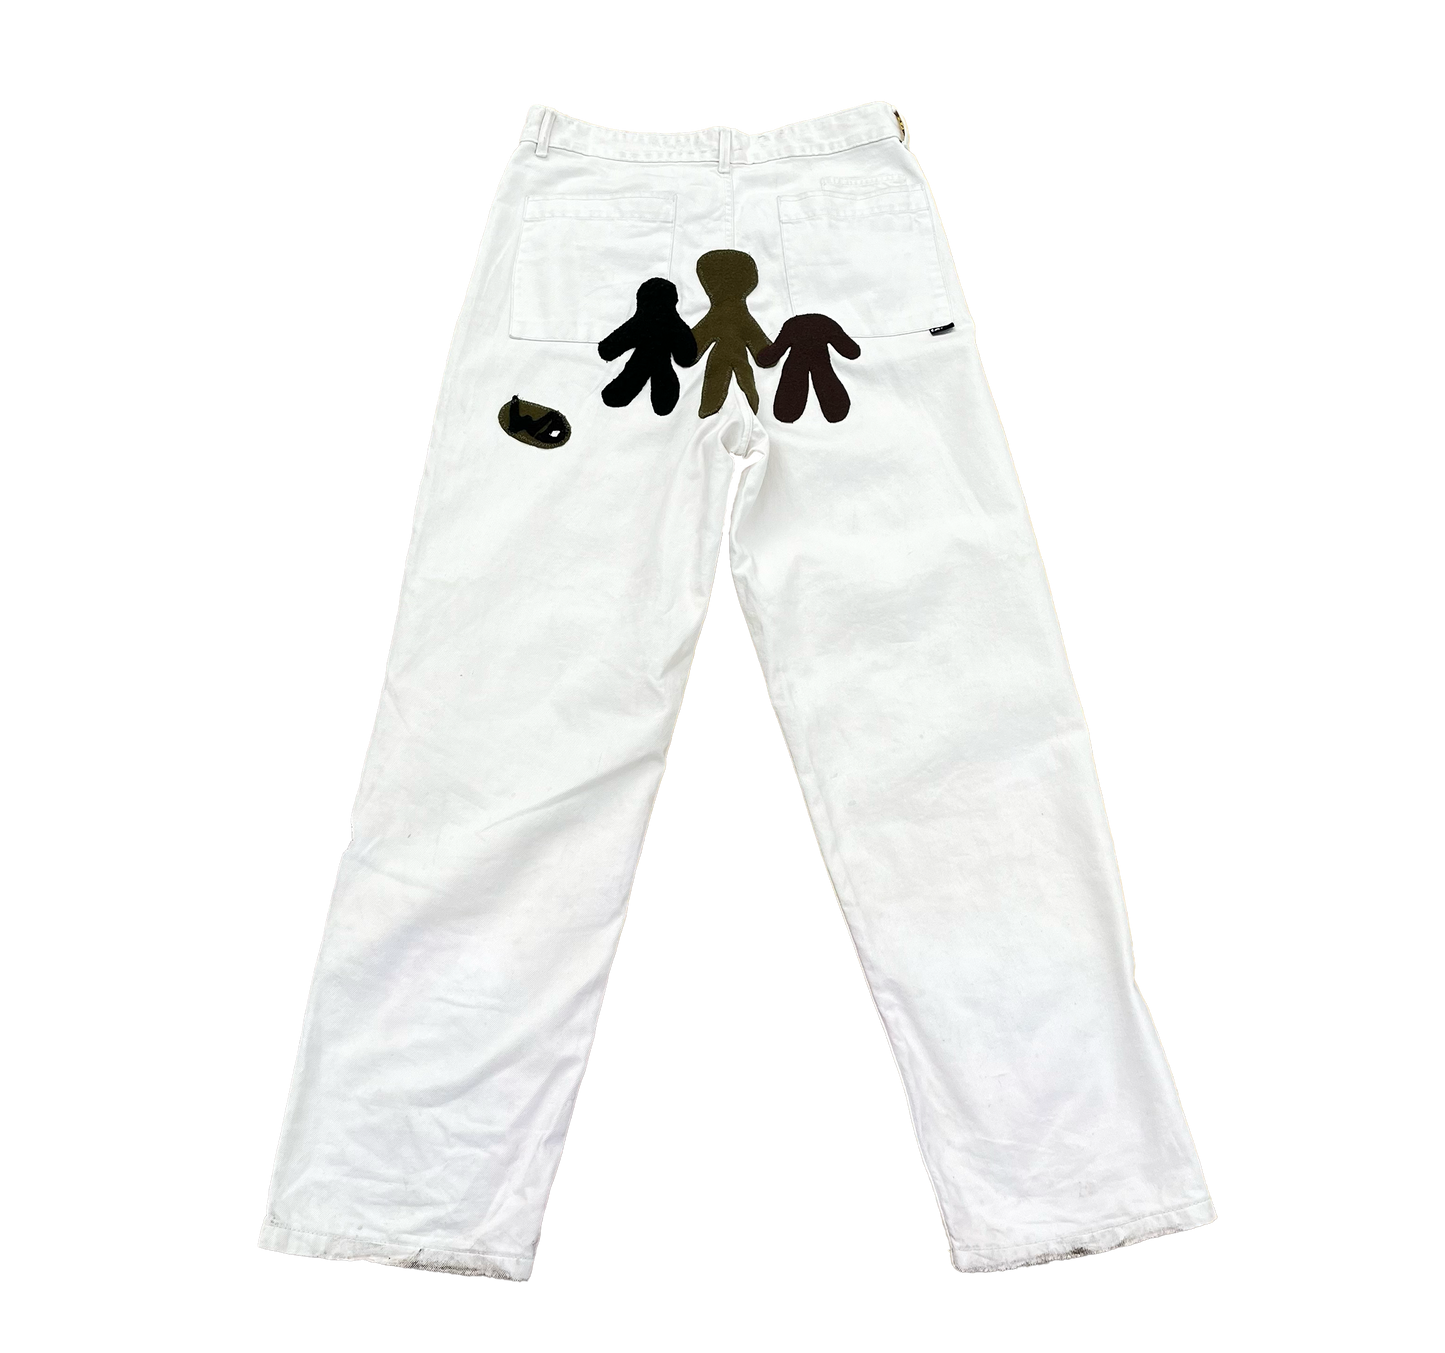 1of1 White ‘Union’ Jeans